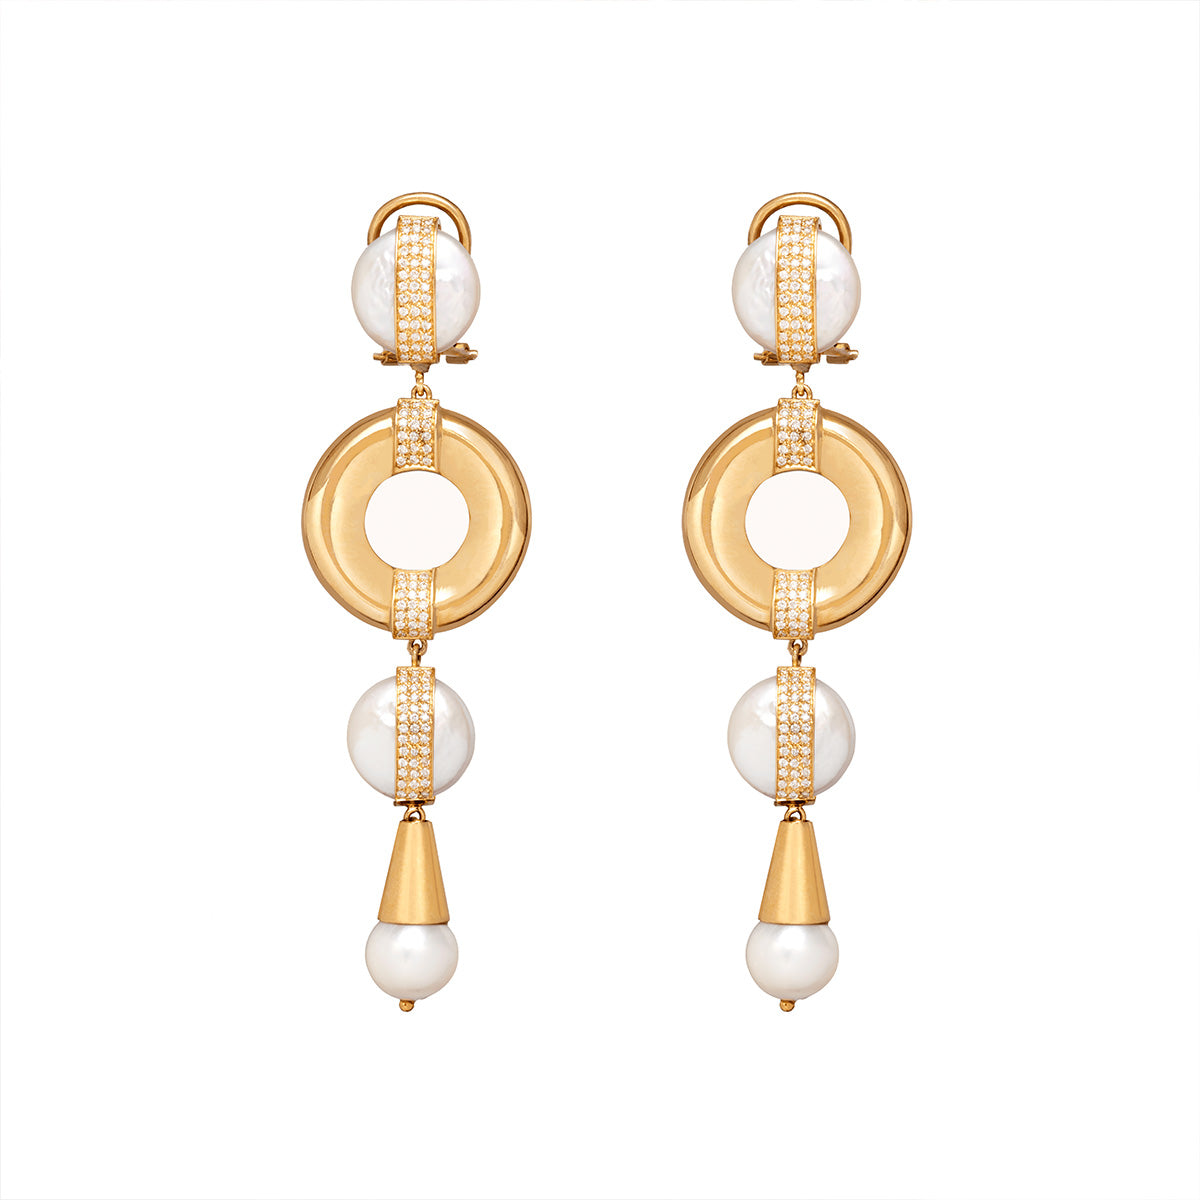 Earrings with Pearls and Diamonds